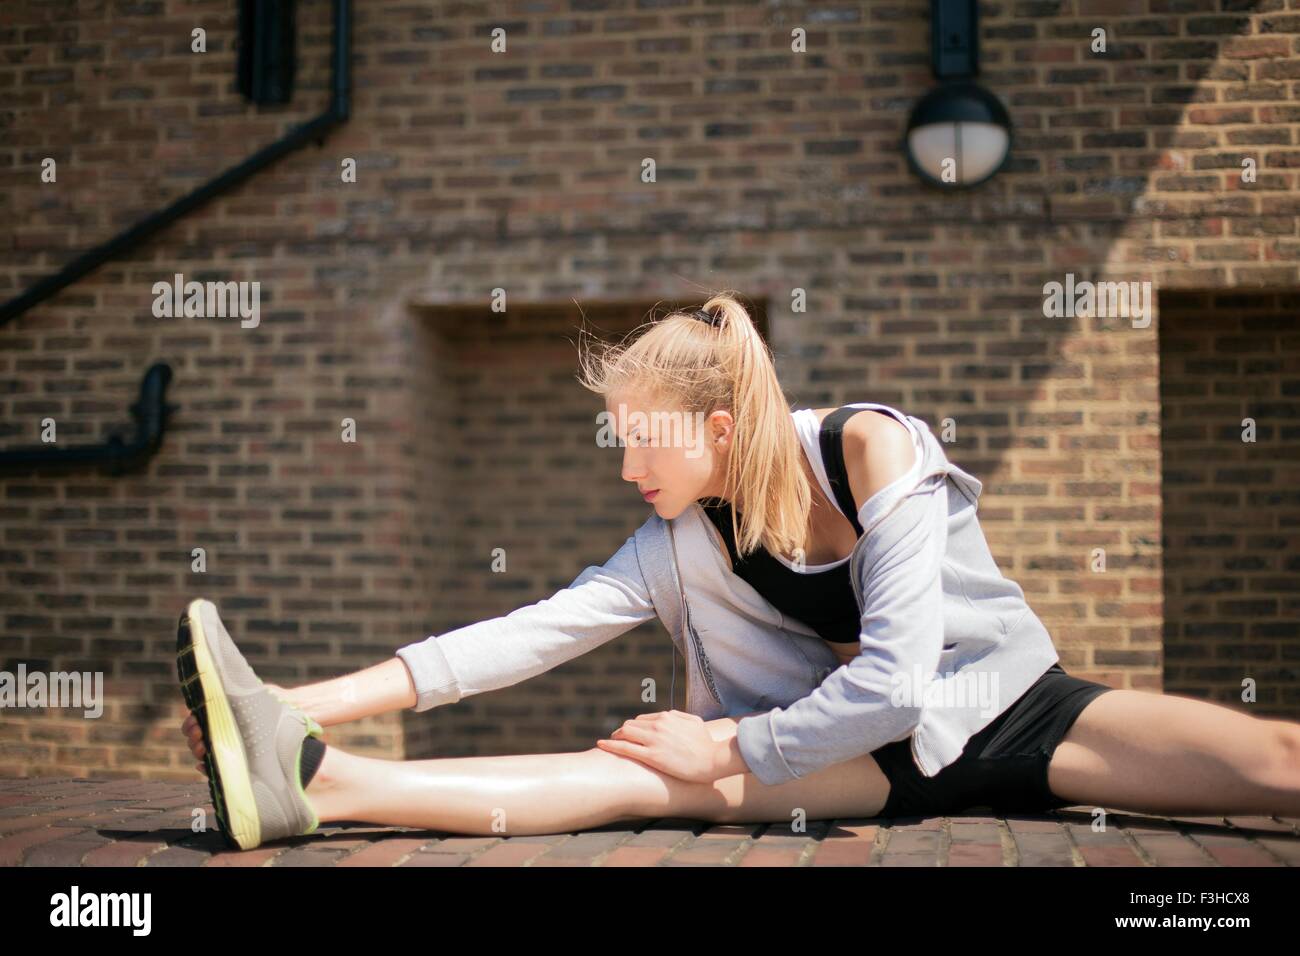 Runner stretching on walkway, Wapping, London Stock Photo